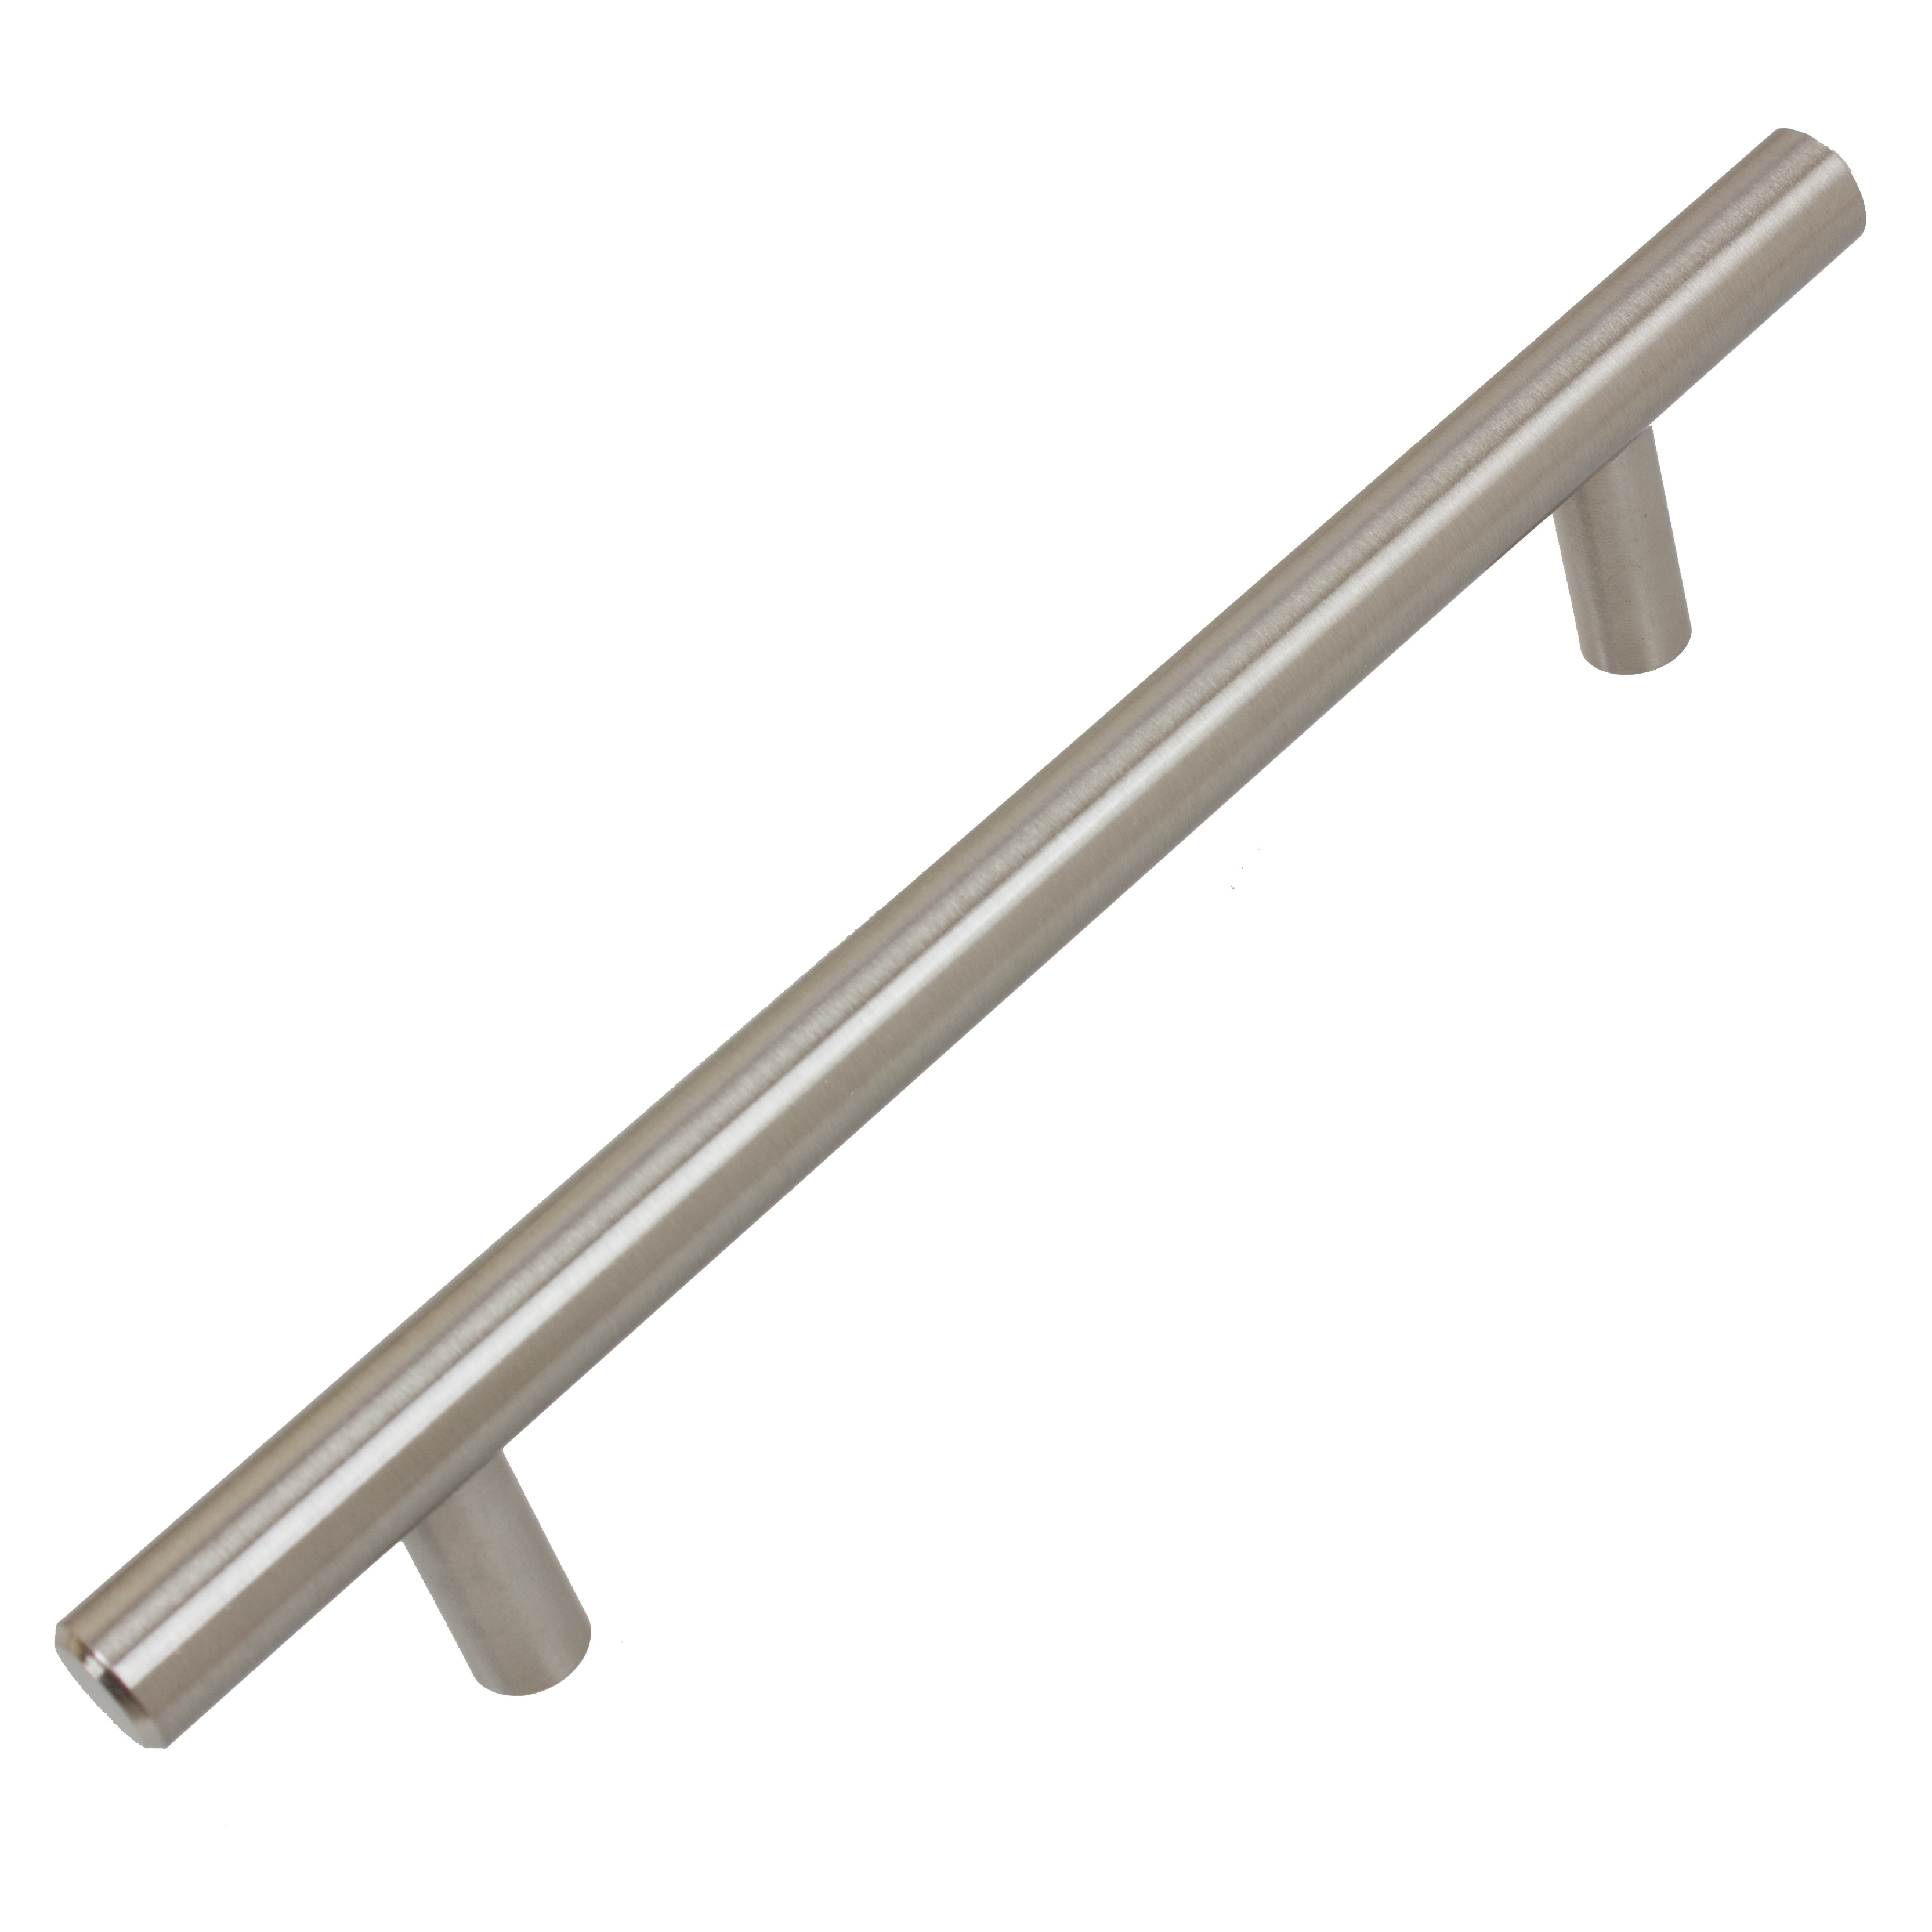 Shop Gliderite 7 Inch Solid Stainless Steel Cabinet Bar Pulls